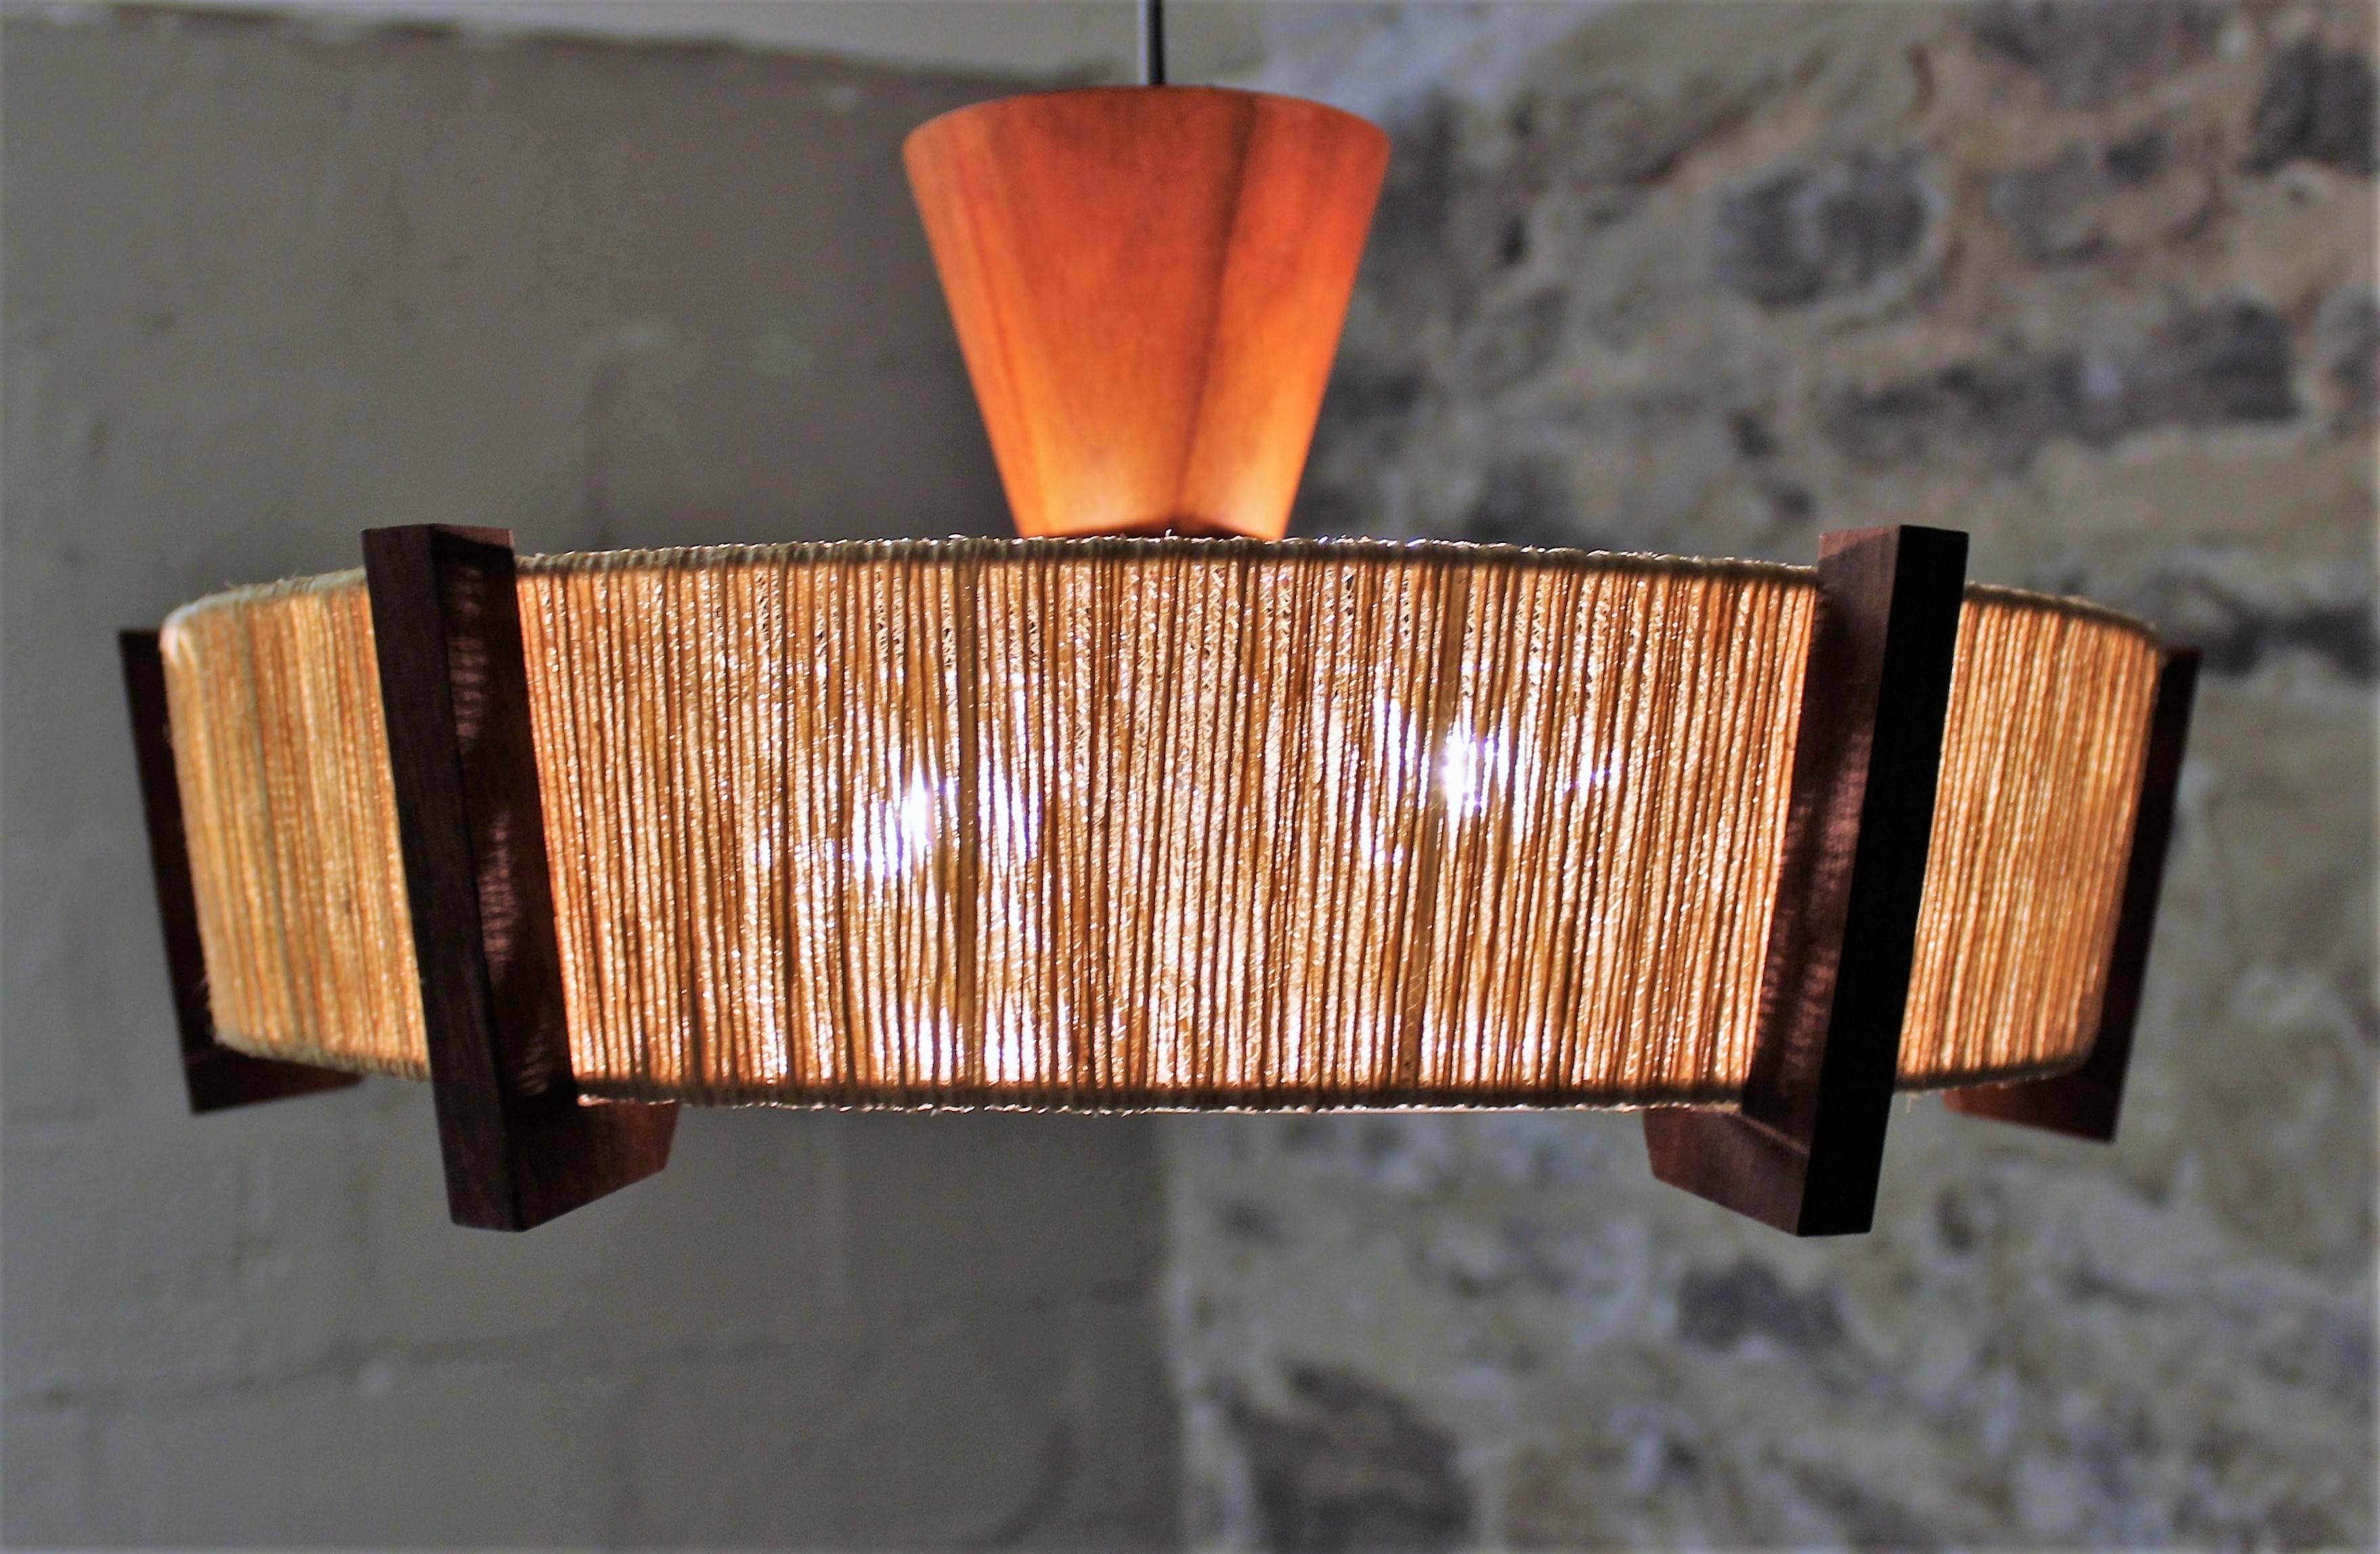 Danish modern pendant and ceiling lights made from teak and woven jute. The pendant’s height is easily adjustable with a pull system designed to slide up and down. It will hang anywhere from 20" - 60" off the ceiling. The ceiling light is